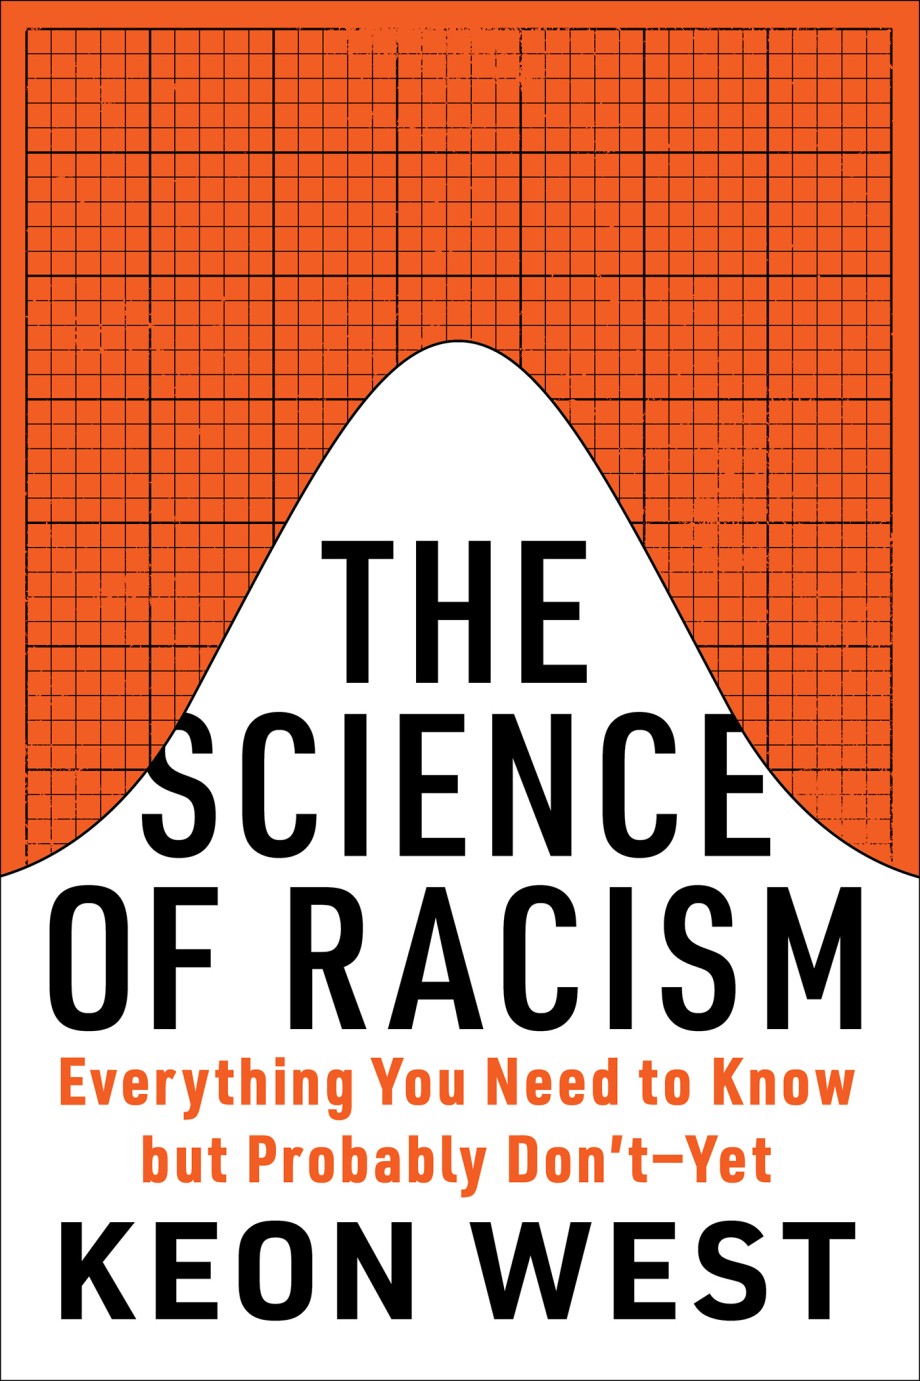 Science of Racism Everything You Need to Know but Probably Don't—Yet